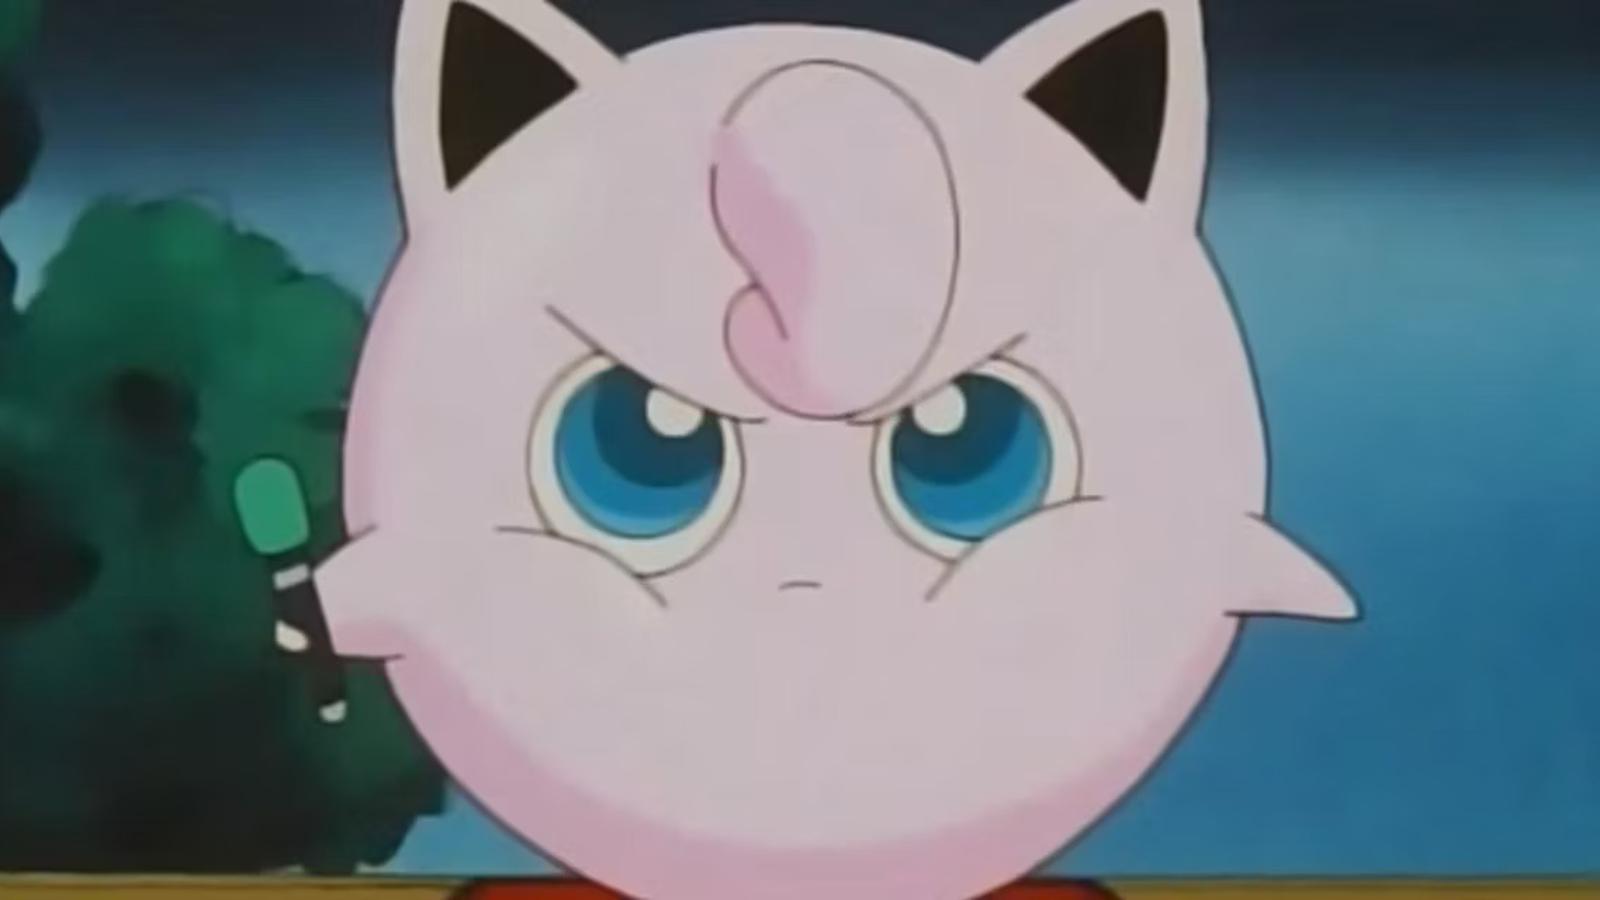 Angry Jigglypuff in the Pokemon anime